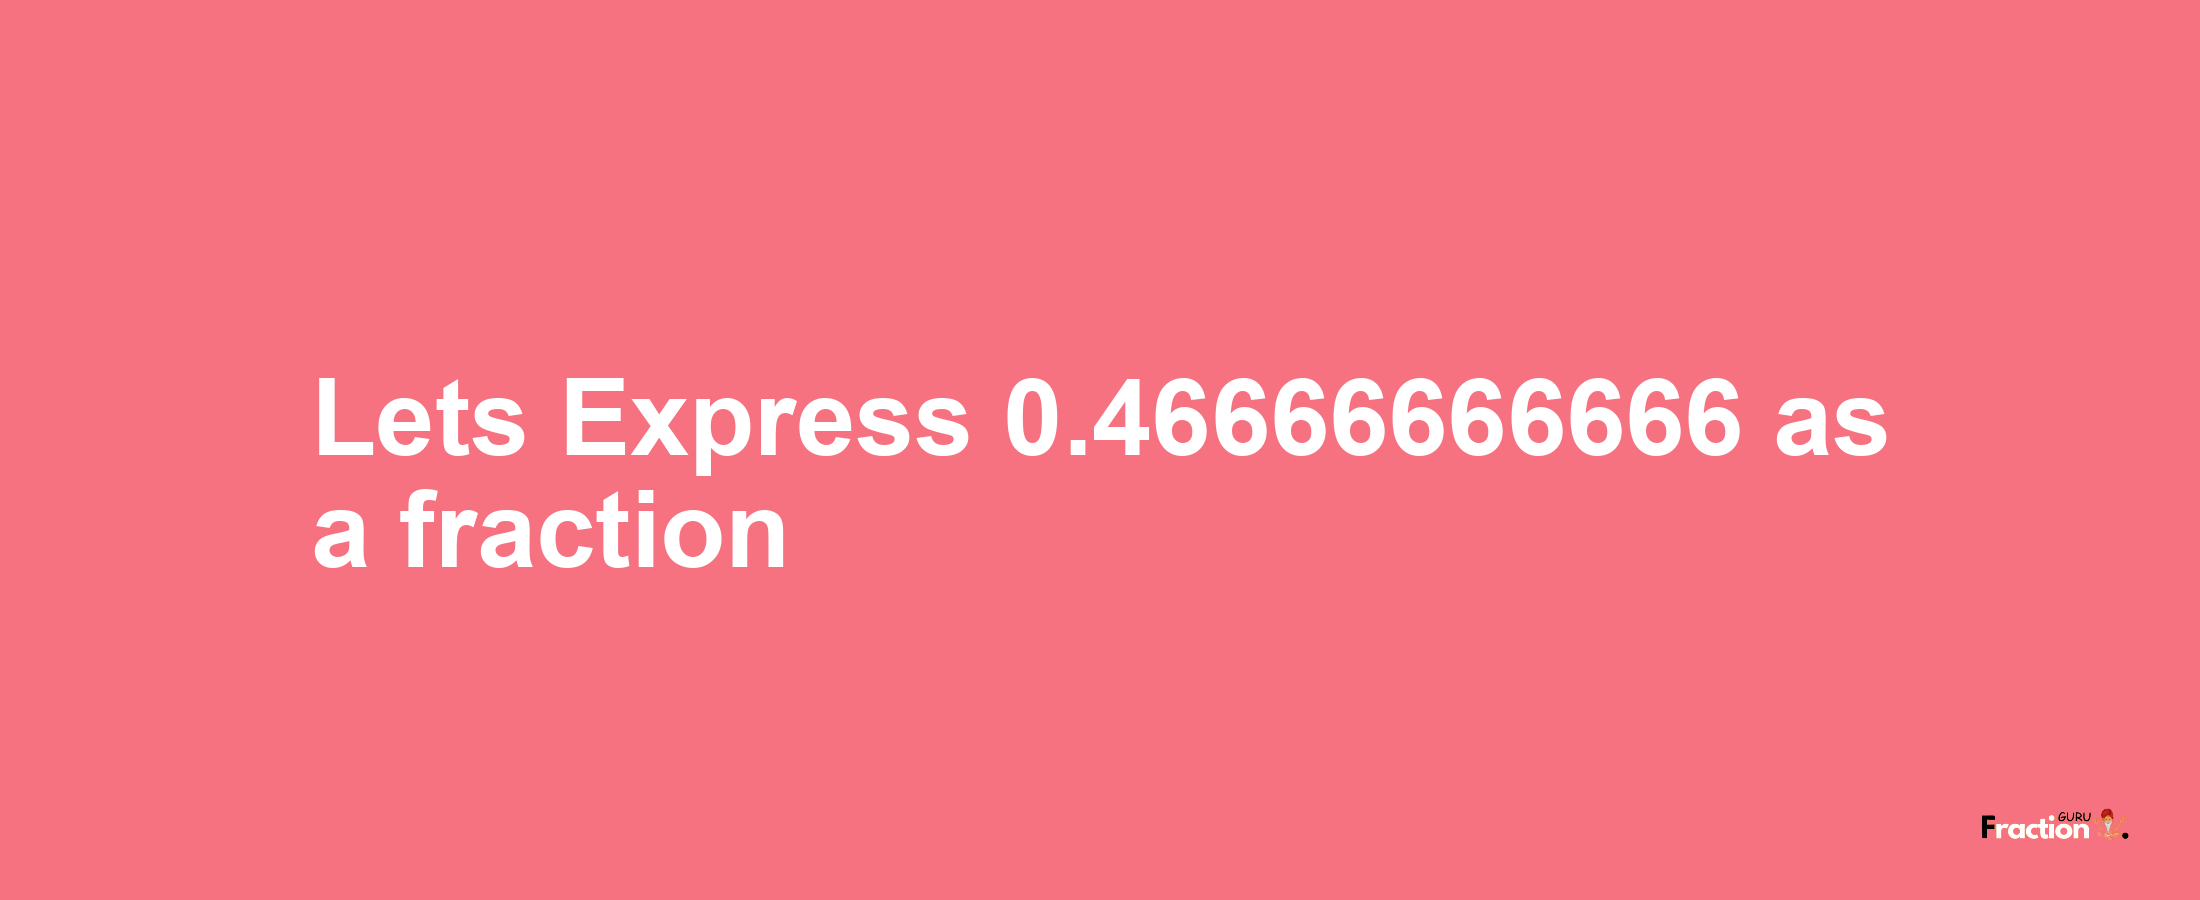 Lets Express 0.46666666666 as afraction